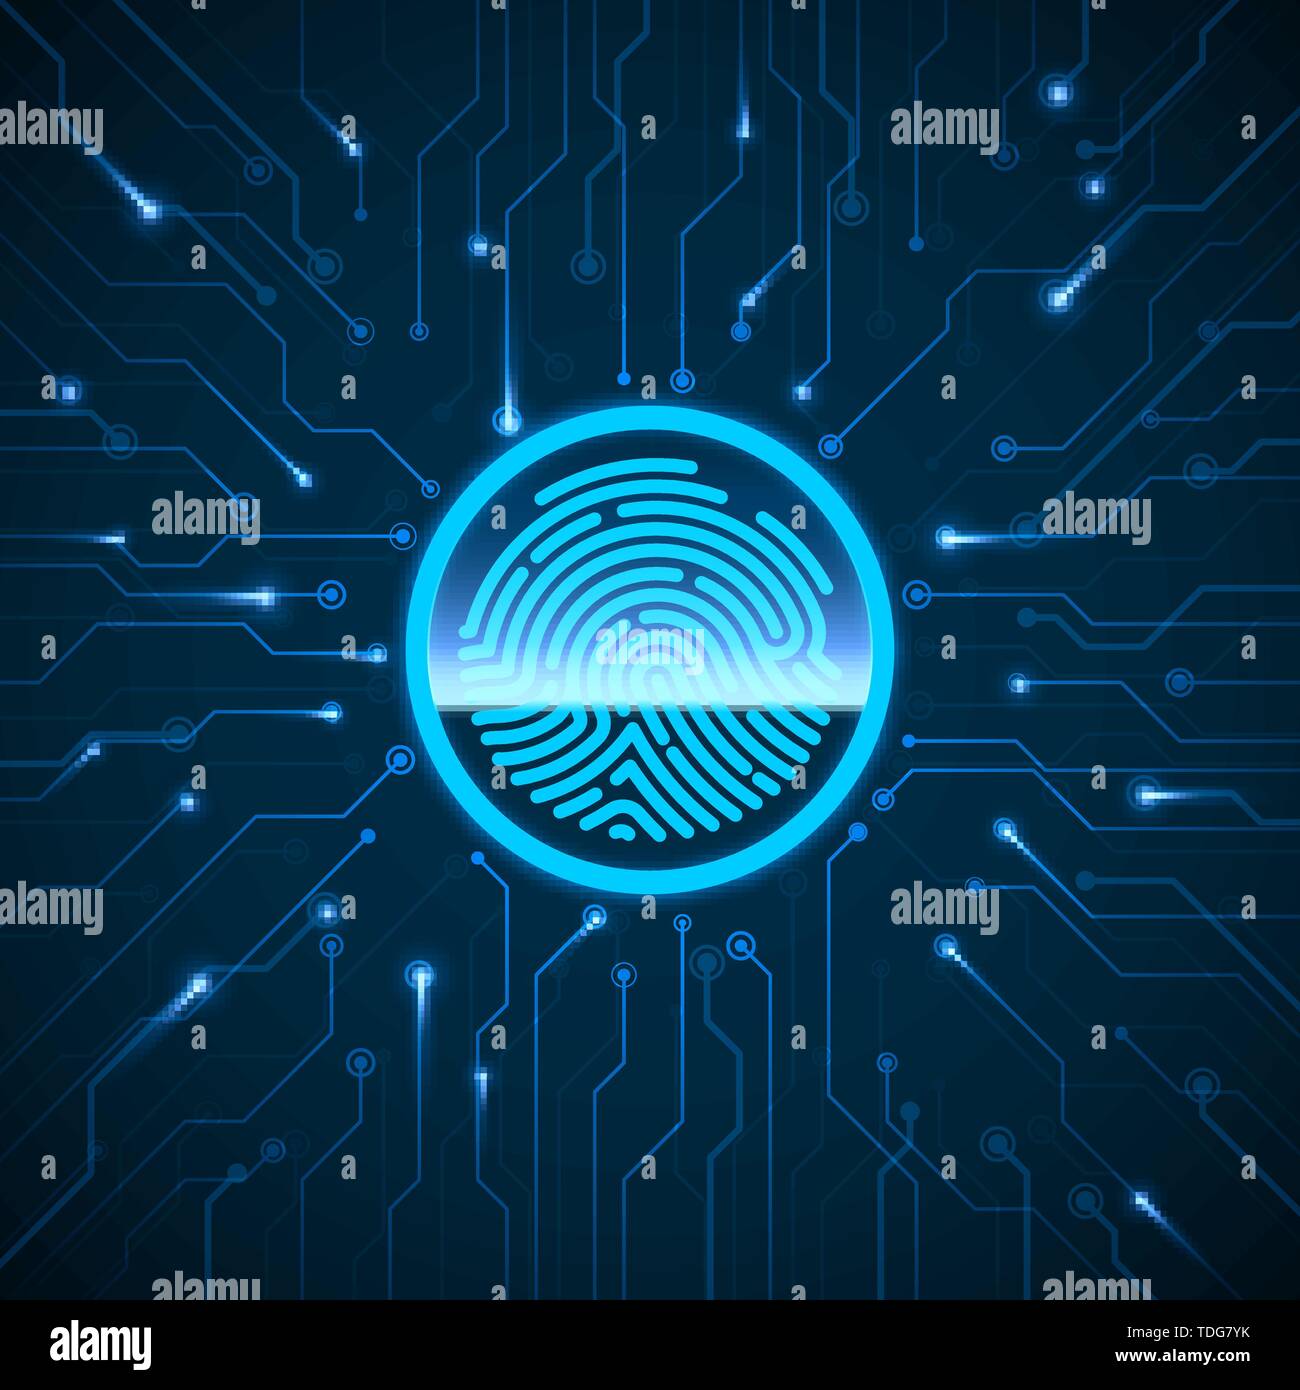 Cyber Security. Fingerprint Scanning Identification System. Finger Print Scanned on Circuit. Biometric Authorization and Security Concept. Vector illu Stock Vector